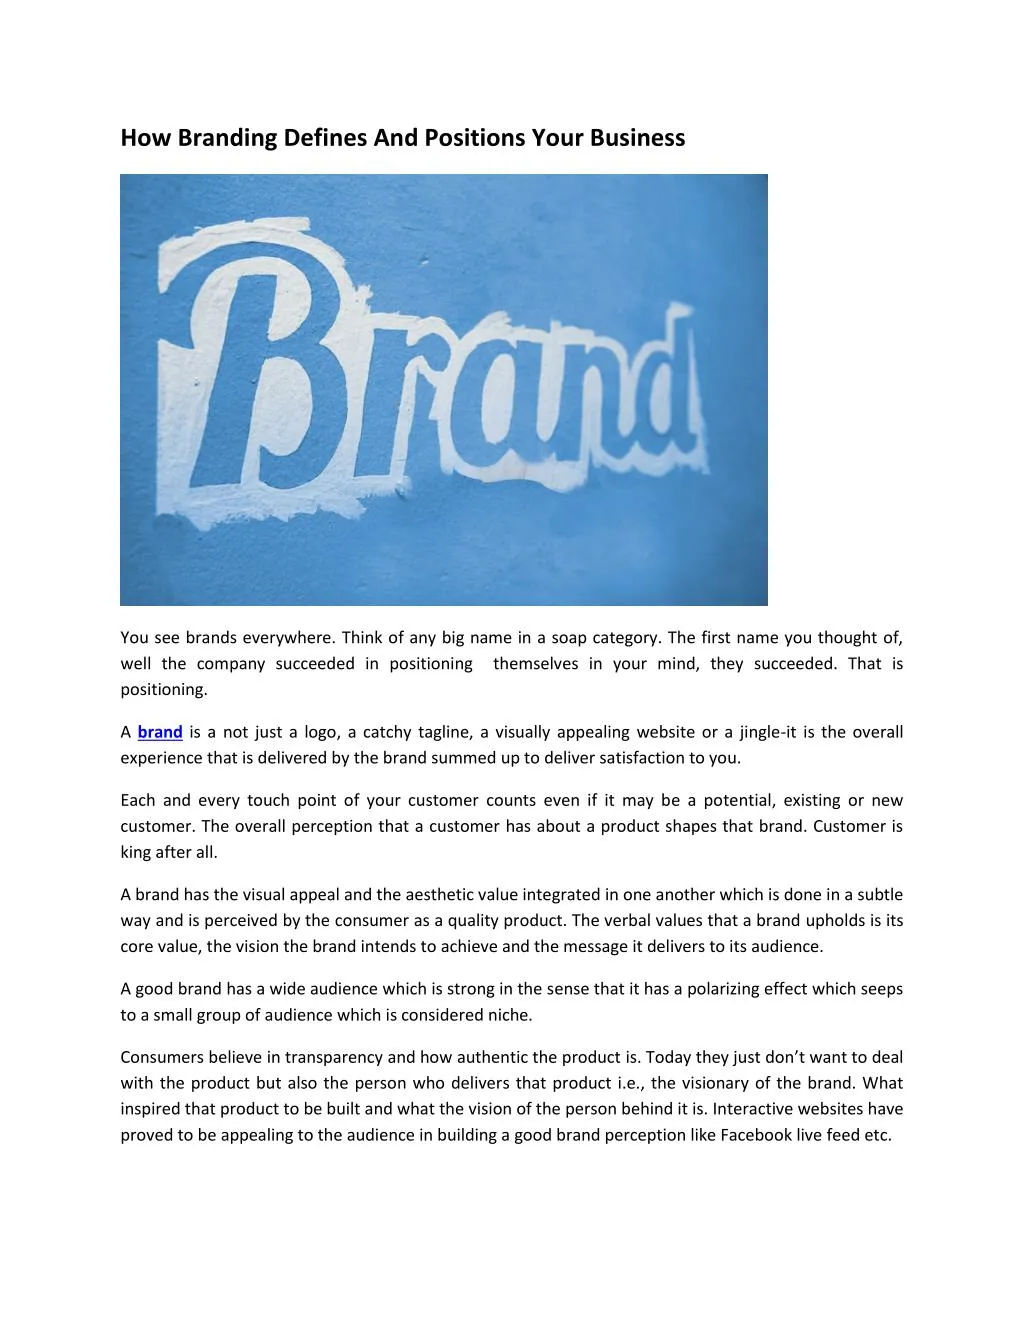 how branding defines and positions your business